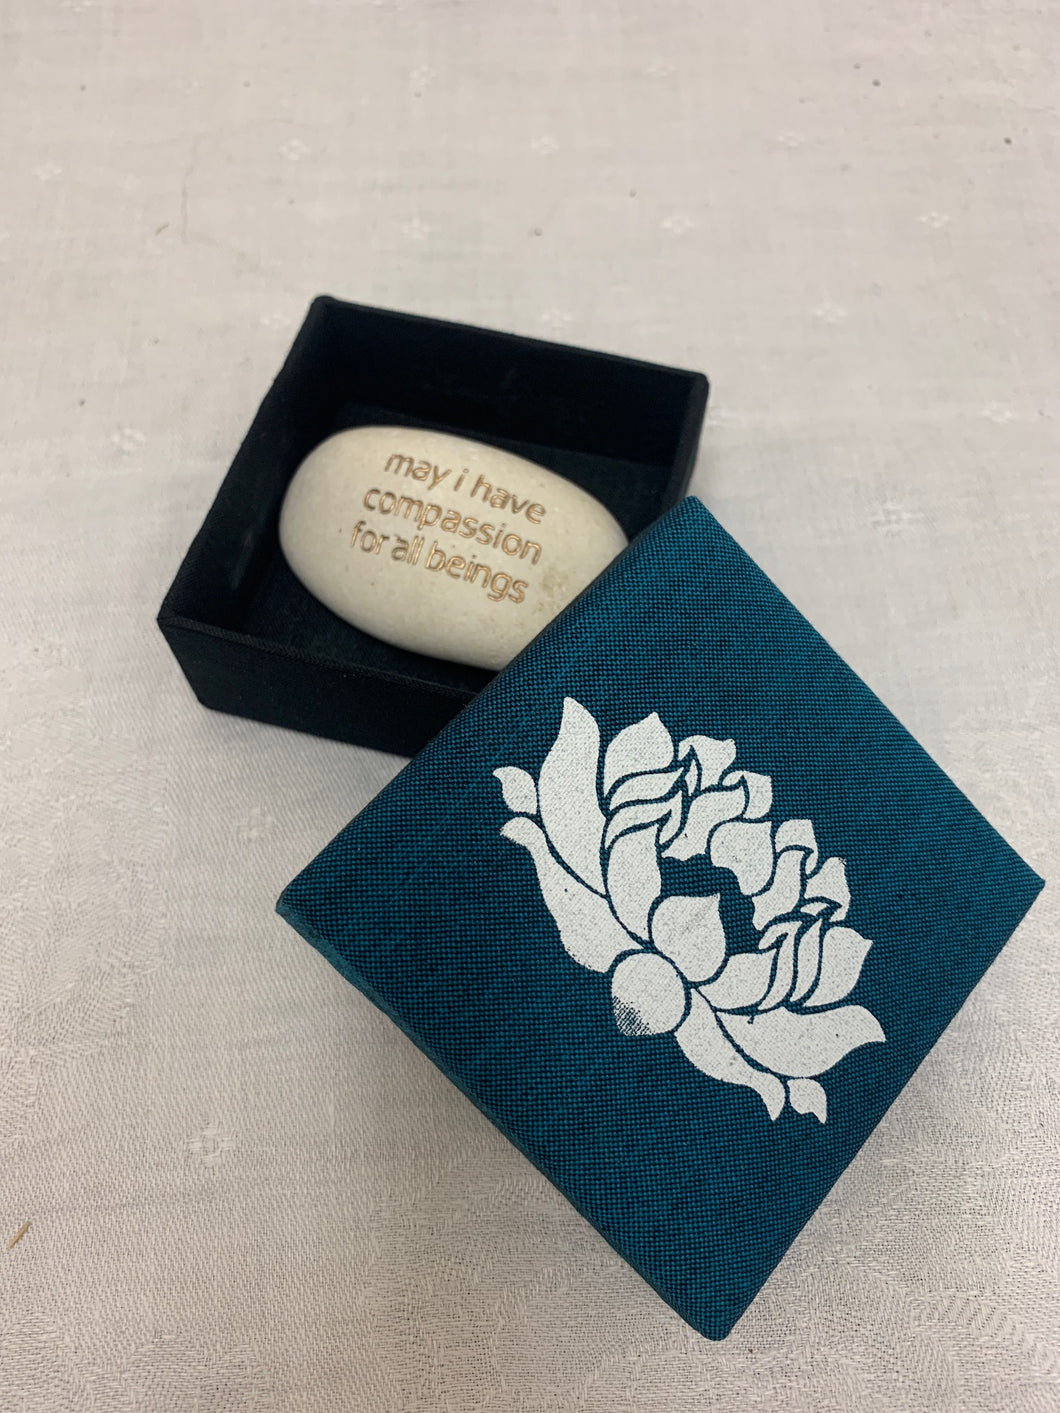 box - affirmation LOTUS - turquoise - stone 'may I have compassion for all beings'